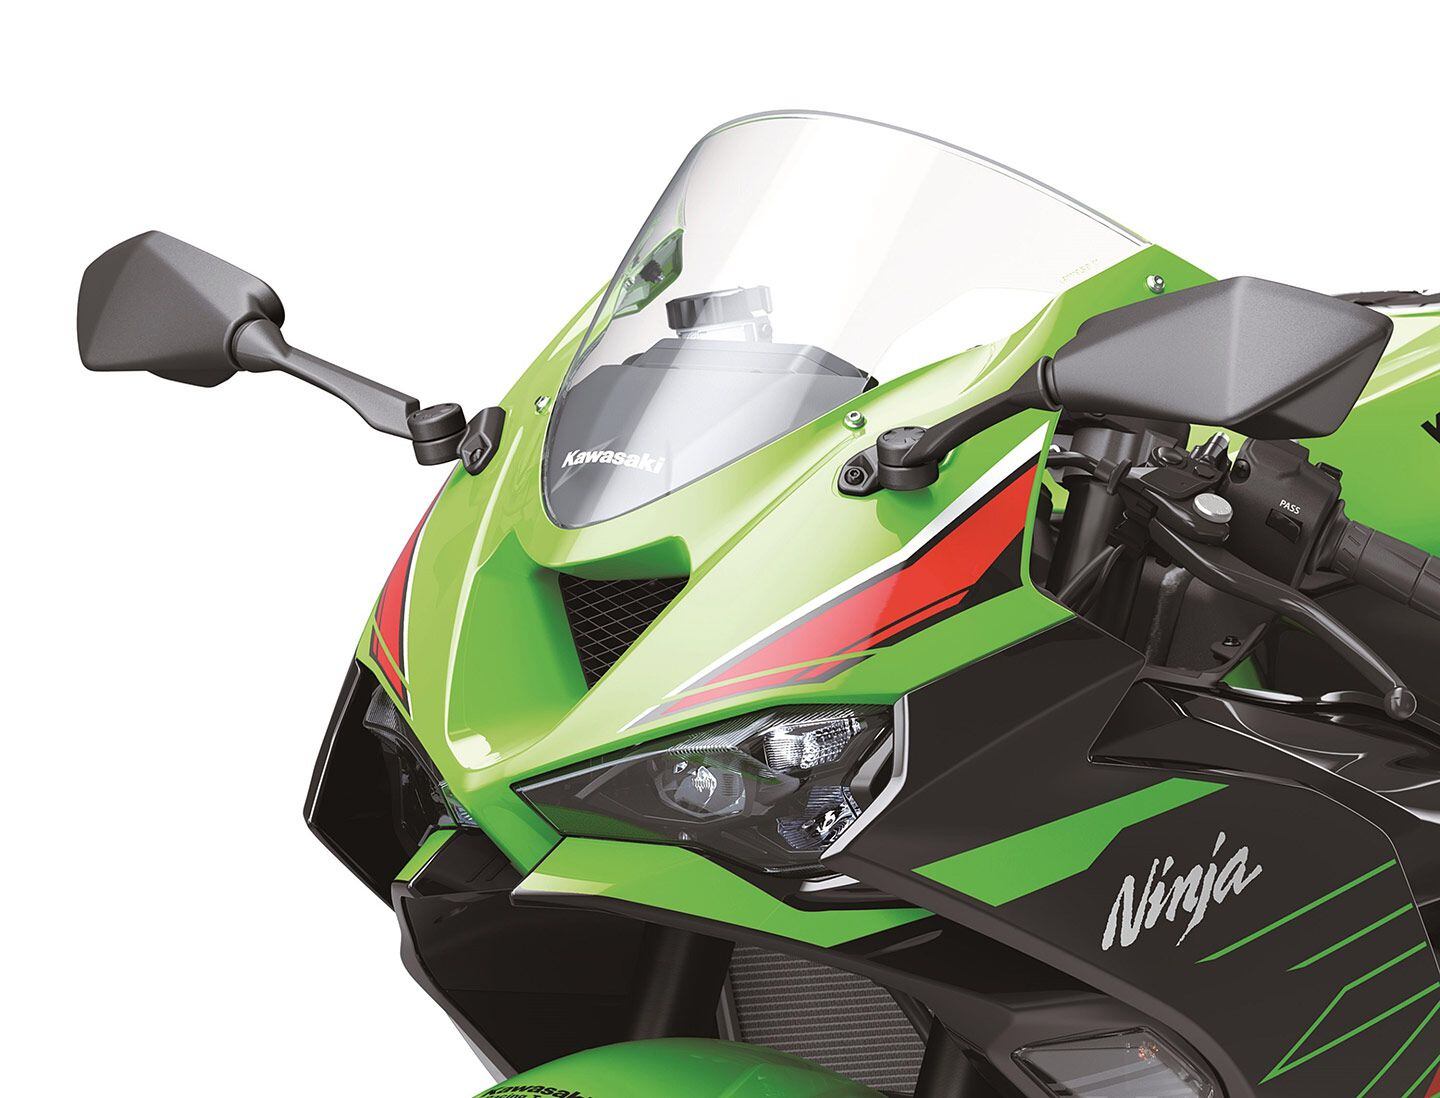 Fresh styling on the nose unit side fairings and new ducting give the ZX-6R a more modern appearance.